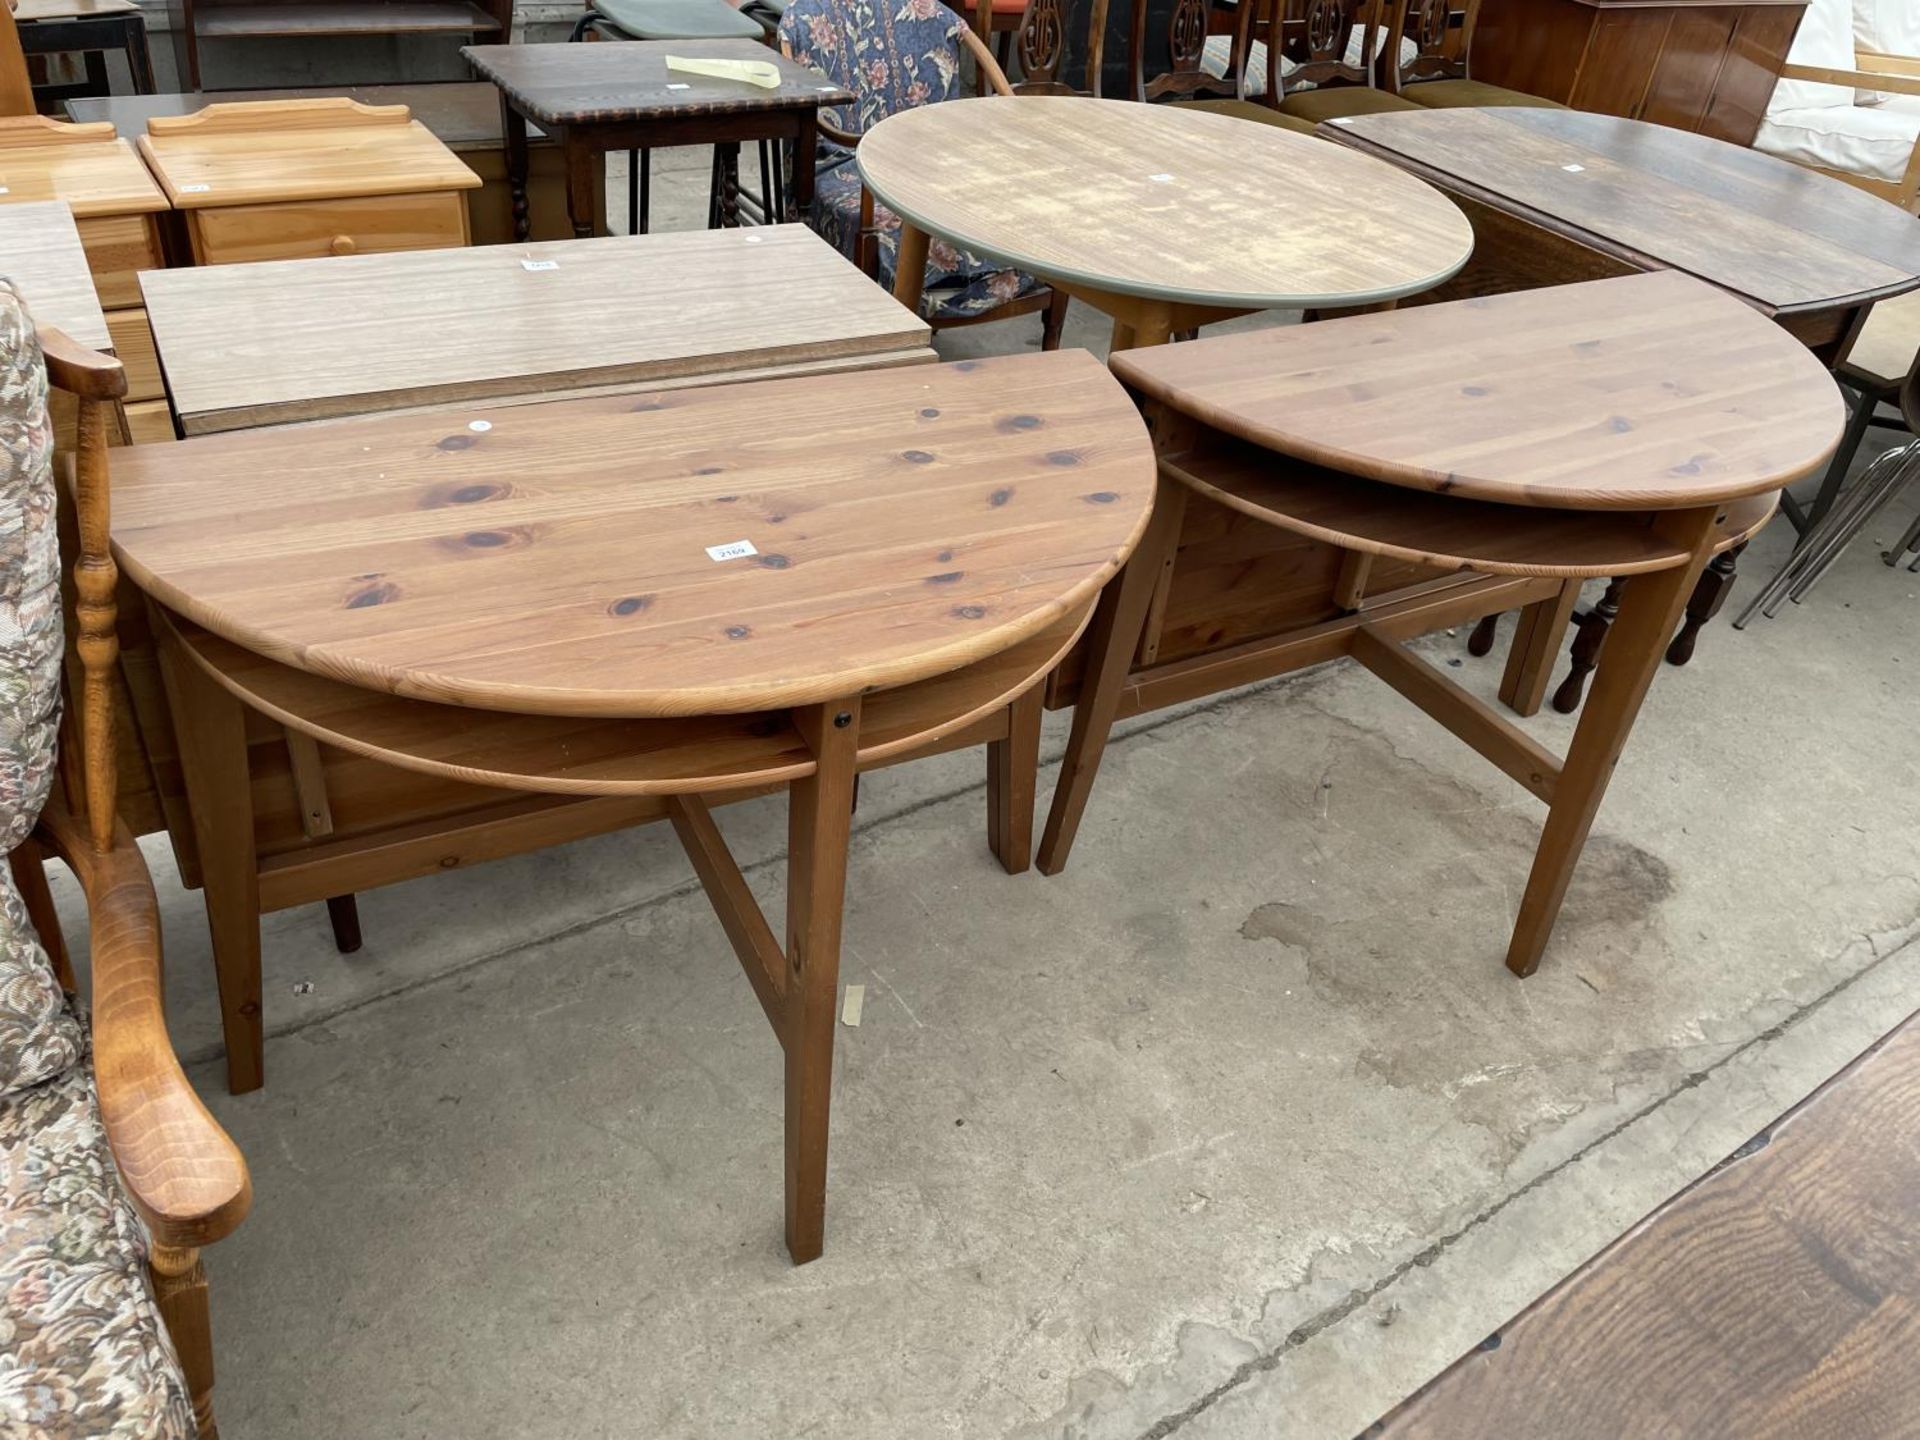 TWO PINE DROP LEAF TABLES